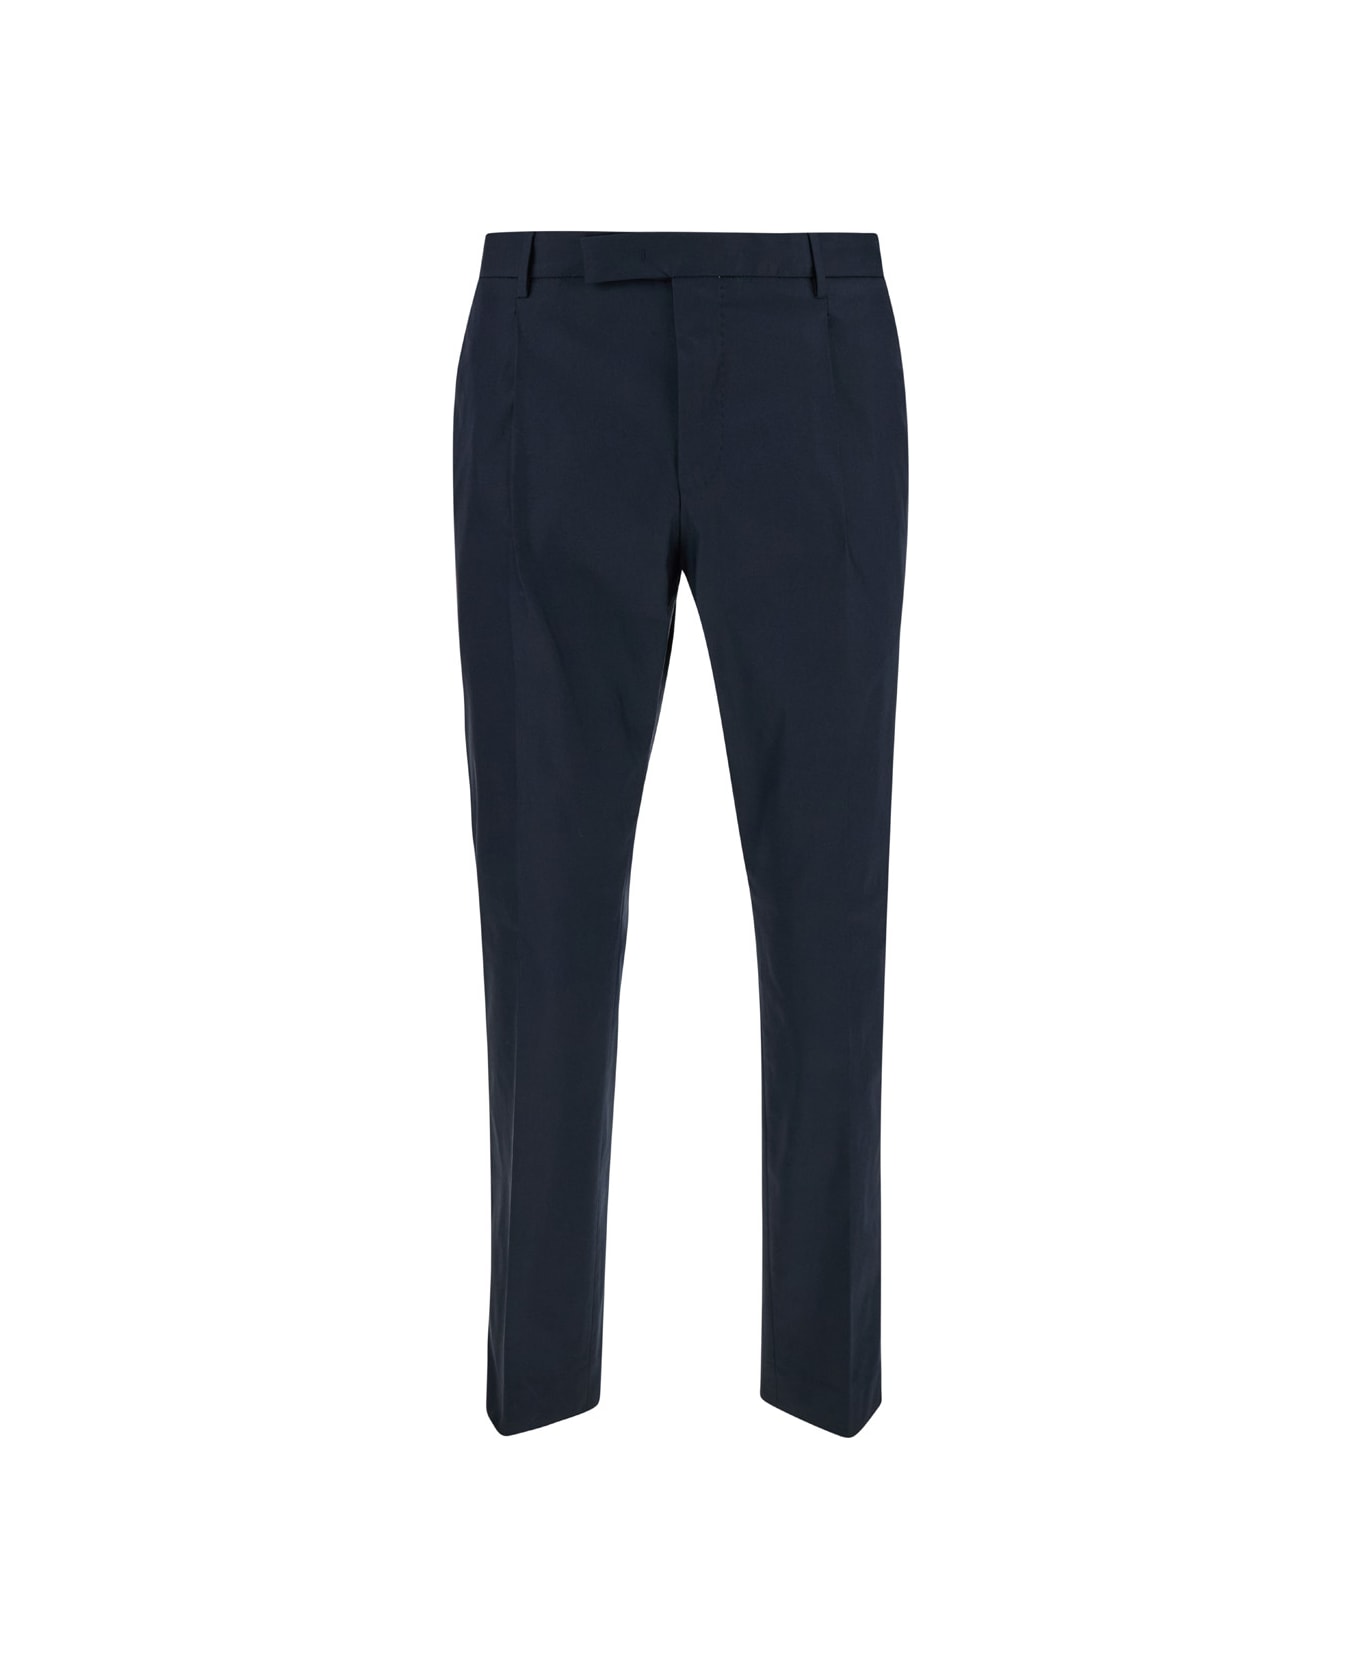 PT01 Blue Slim Fit Tailored Trousers In Cotton Blend Man - Blu ボトムス